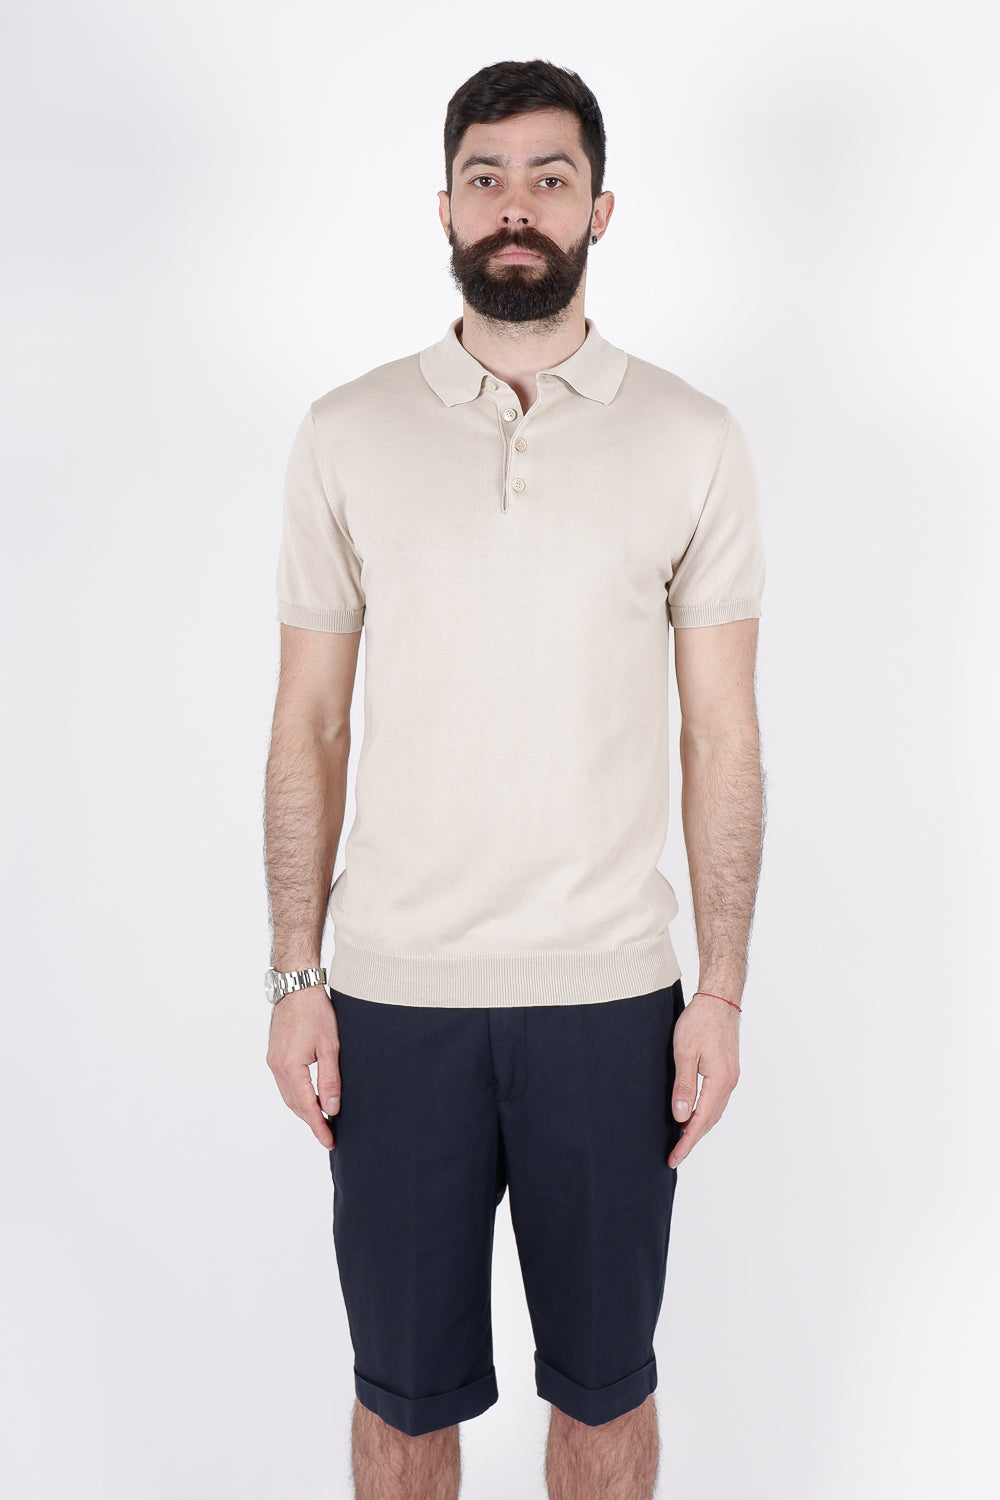 Buy the Daniele Fiesoli Ultra Soft Cotton Polo in Beige at Intro. Spend £50 for free UK delivery. Official stockists. We ship worldwide.